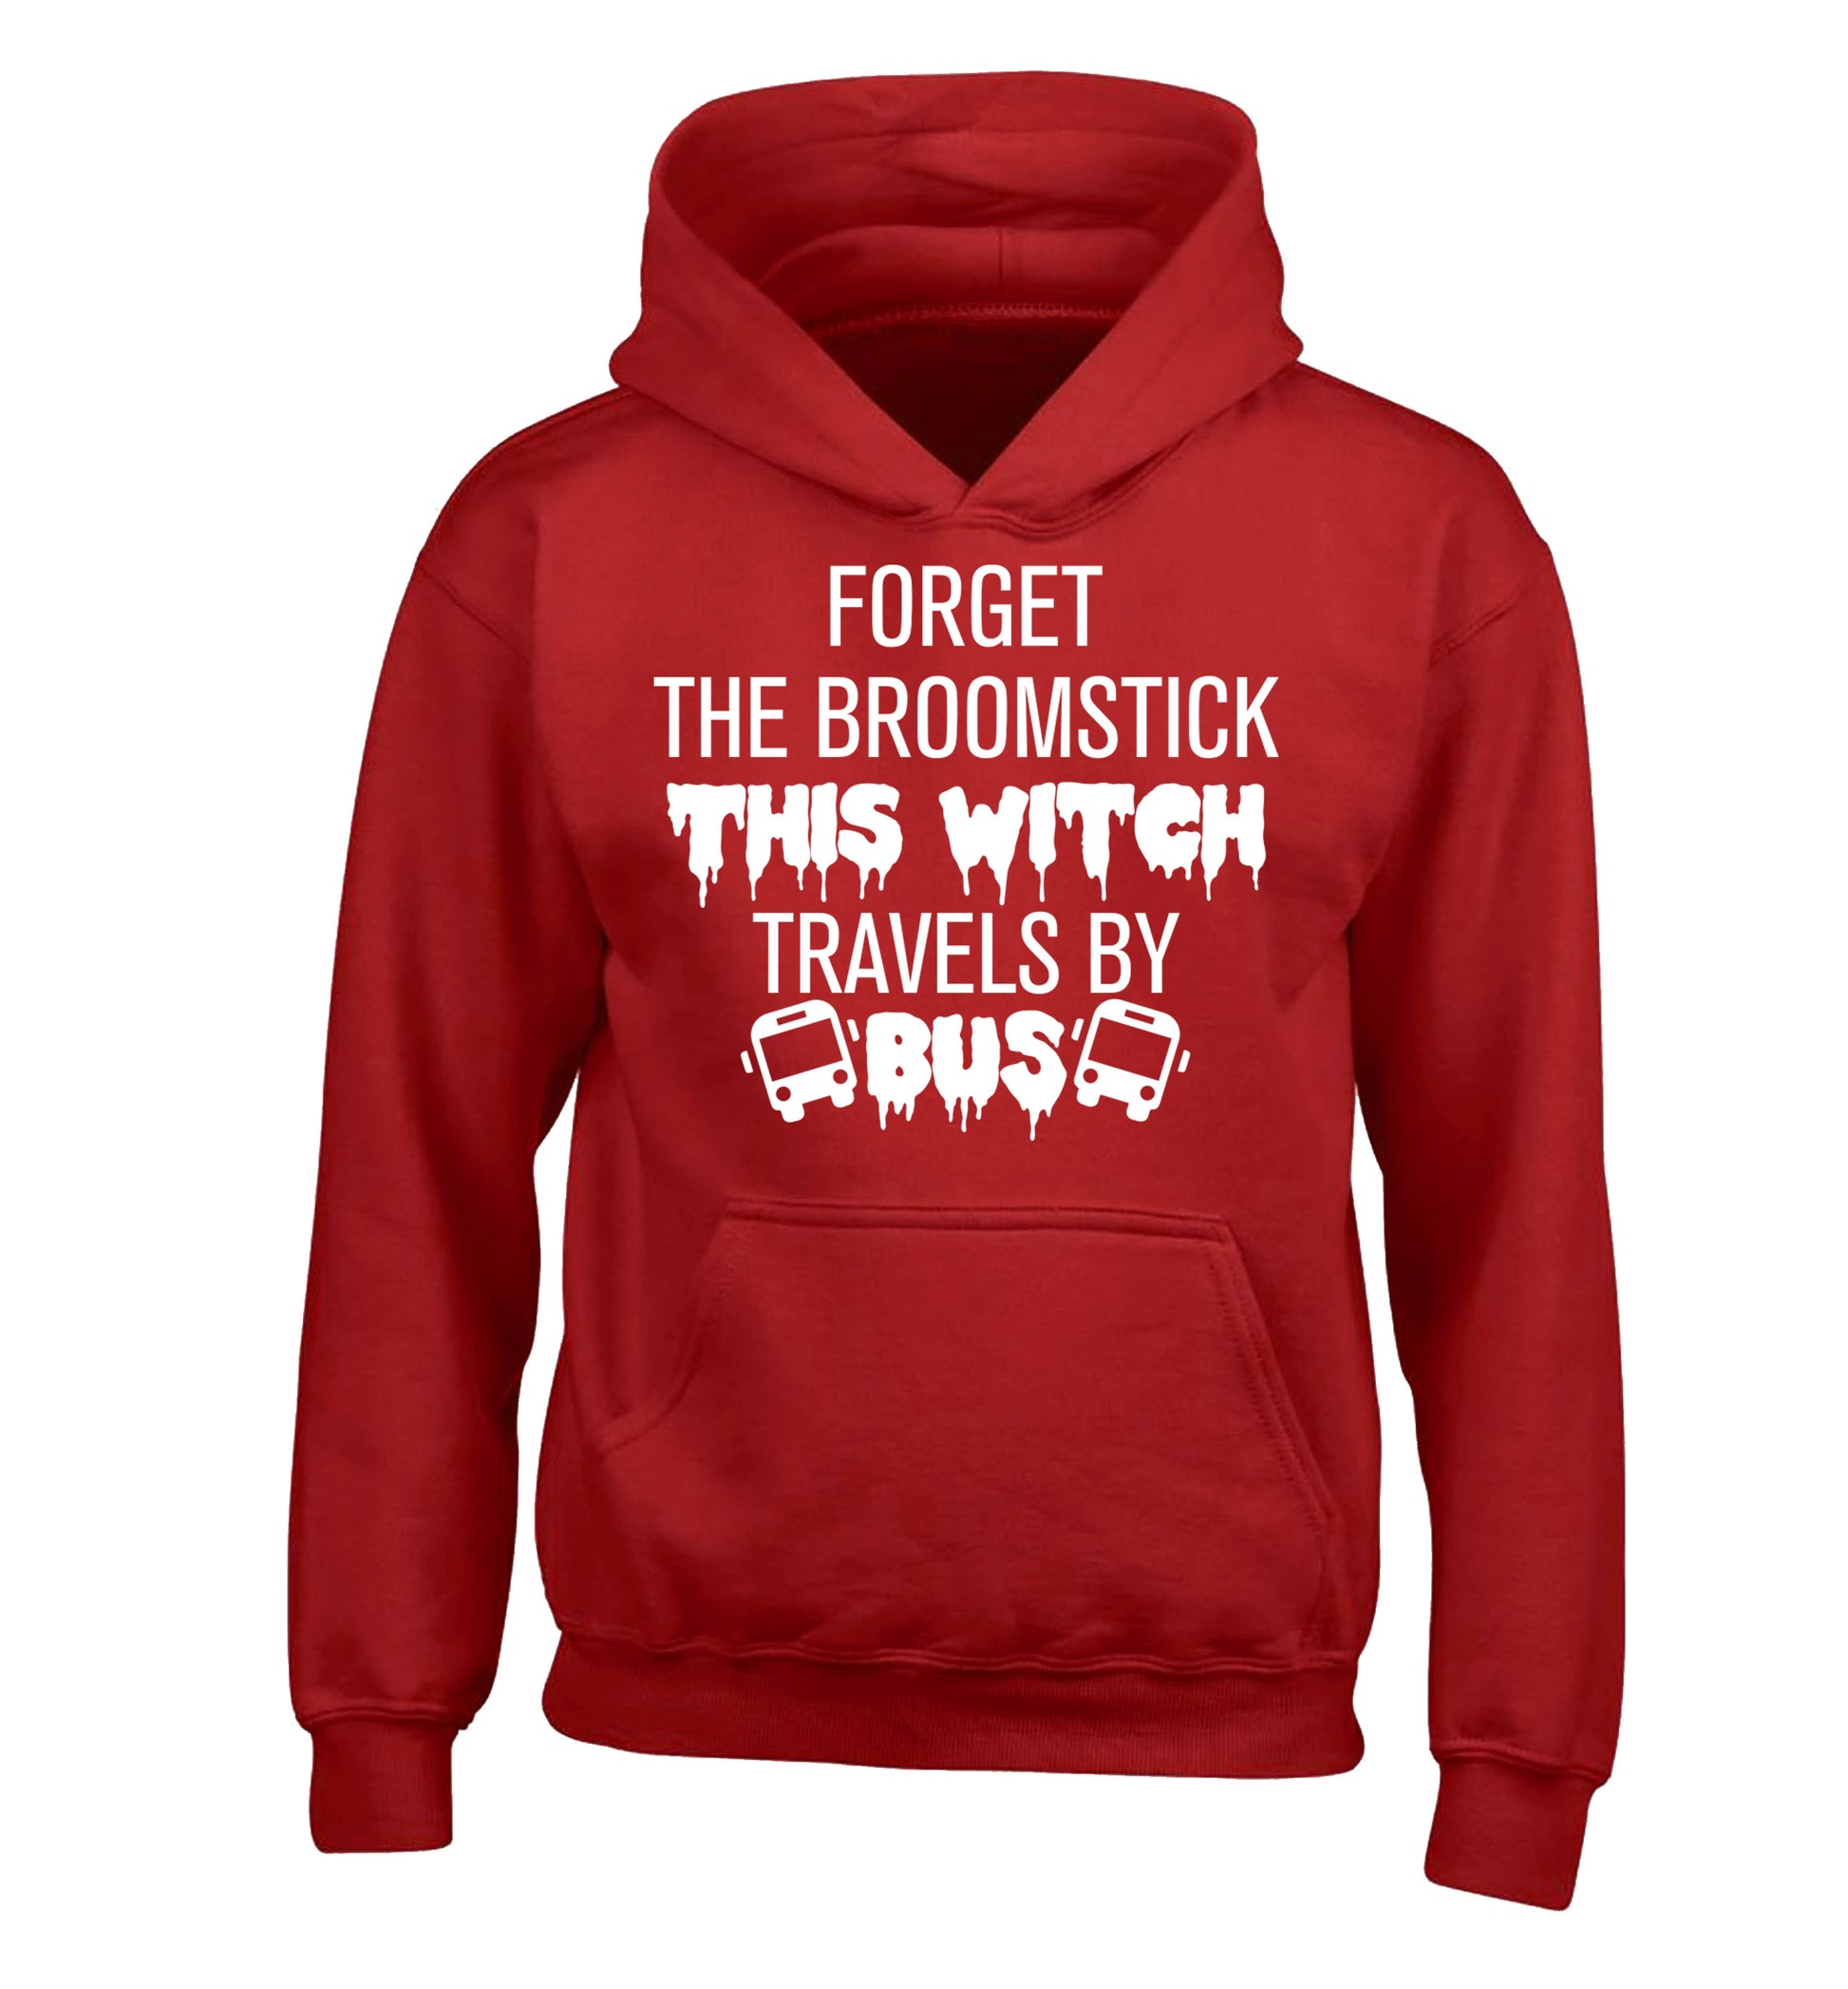 Forget the broomstick this witch travels by bus children's red hoodie 12-14 Years